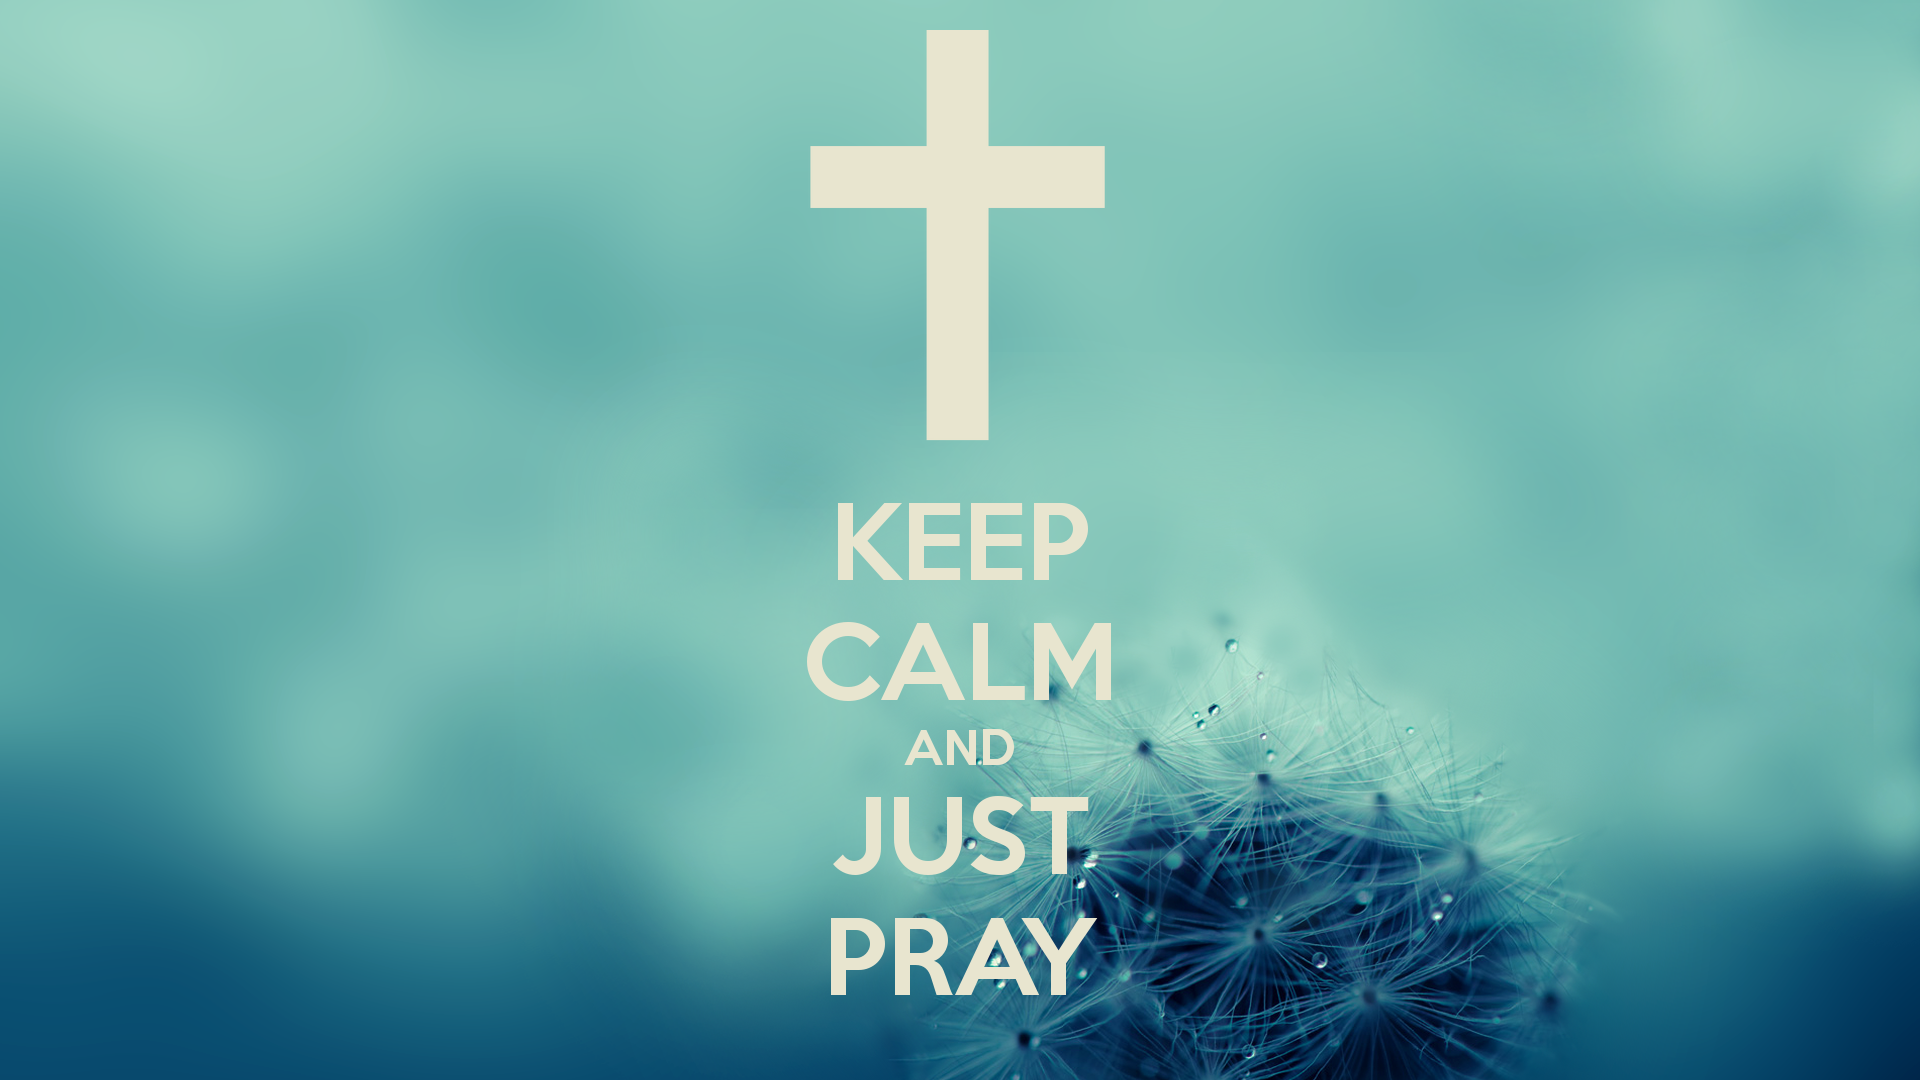 KEEP CALM AND JUST PRAY   KEEP CALM AND CARRY ON Image Generator